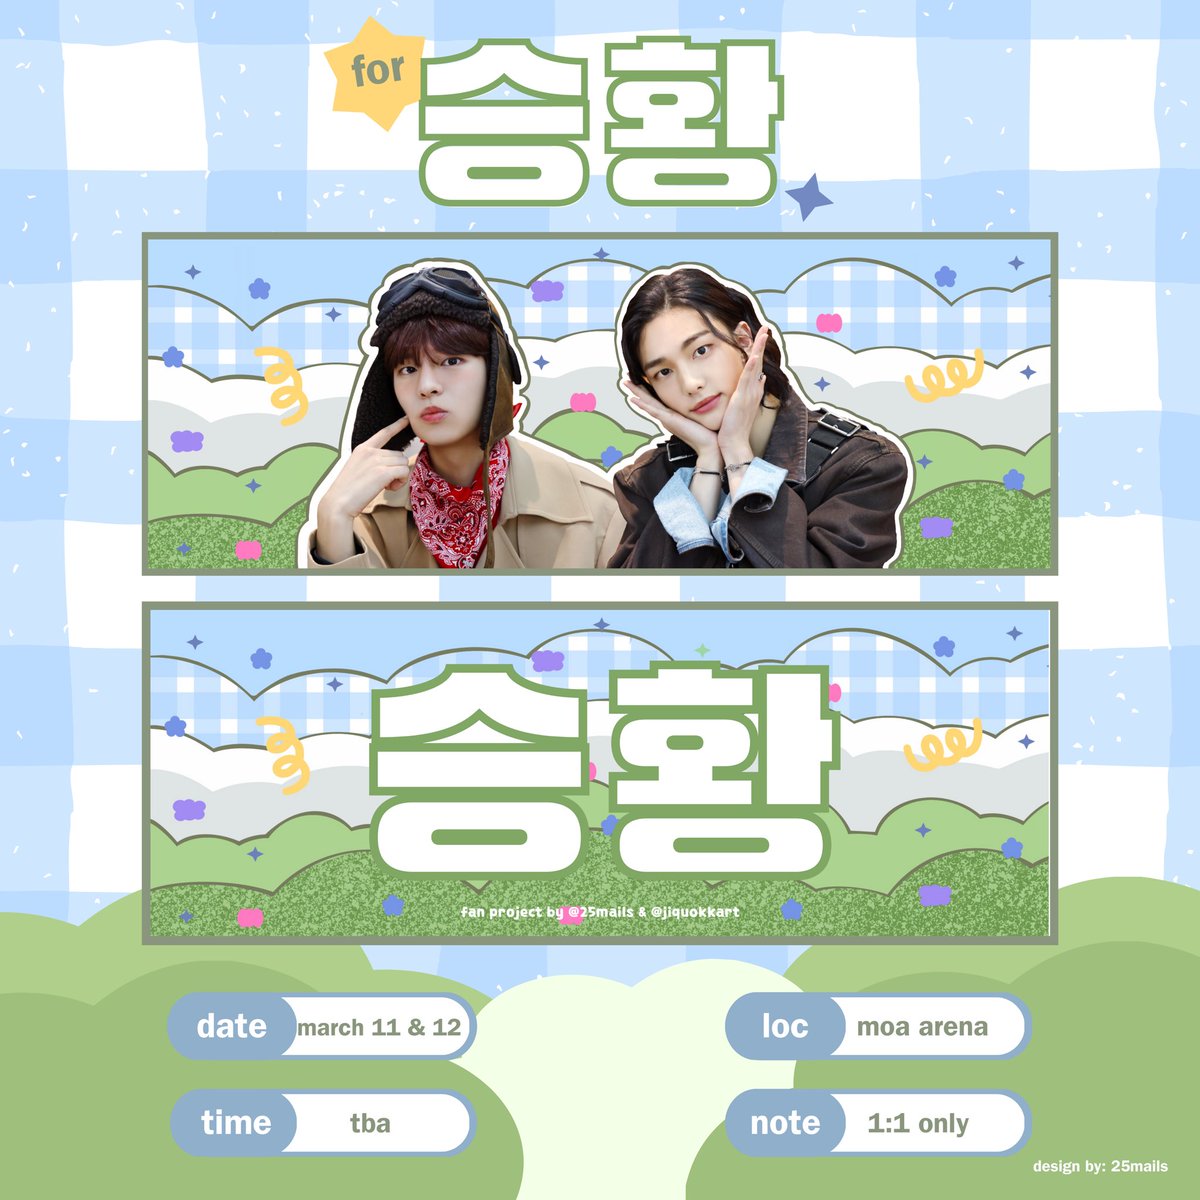 🥟🐶 — Seungmin and Hyunjin BANNER GIVEAWAY by 25mails & jiquokkart 🗓️ March 11-12, 2023 📍 MOA Arena - exact time and location: tba #SKZinMNL2023 #MANIACinMANILA @Stray_Kids